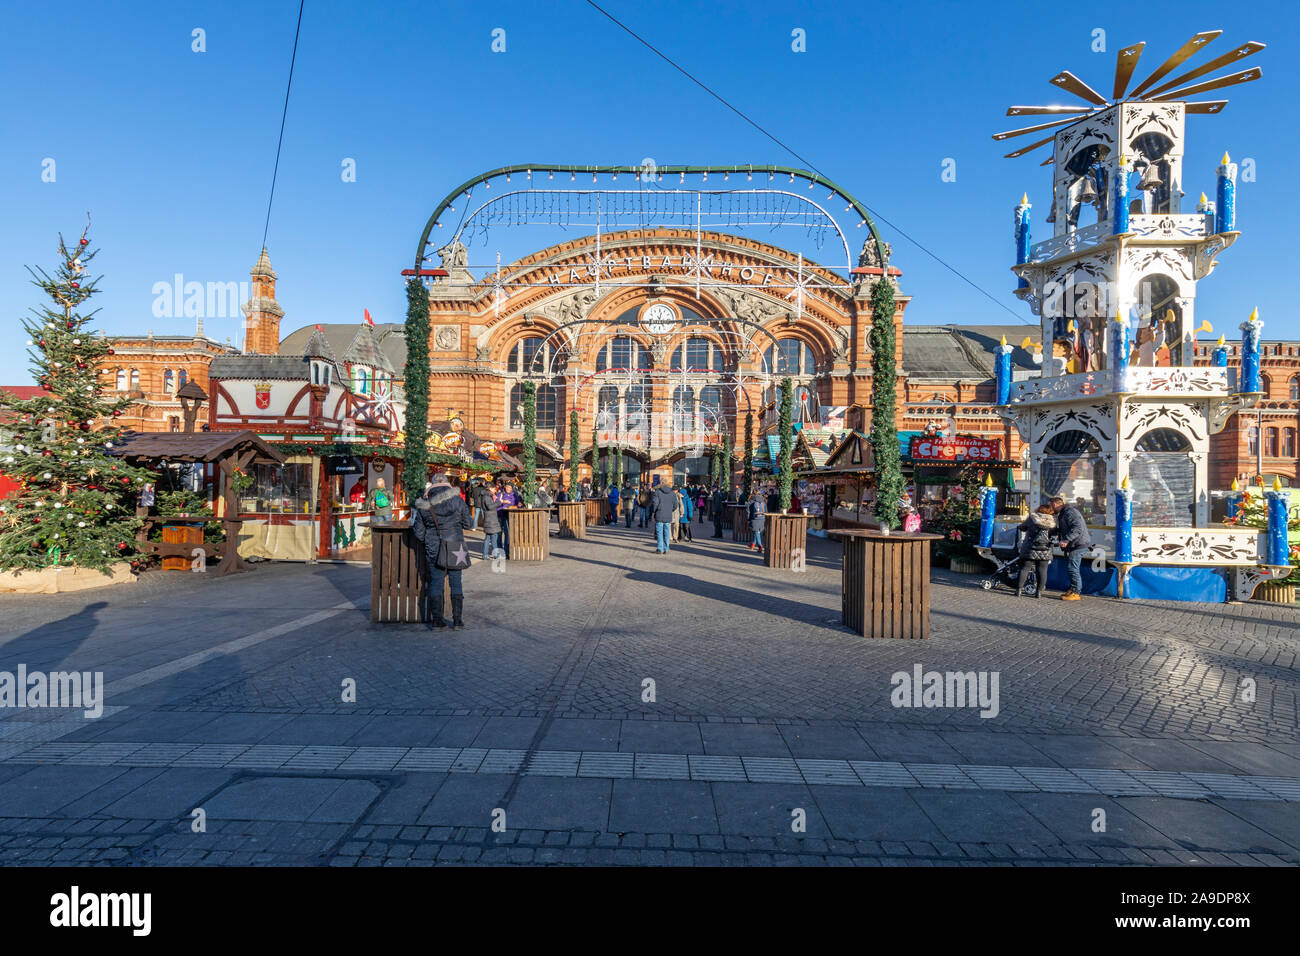 Christmas Market at station square, central station, Bremen, Stock Photo